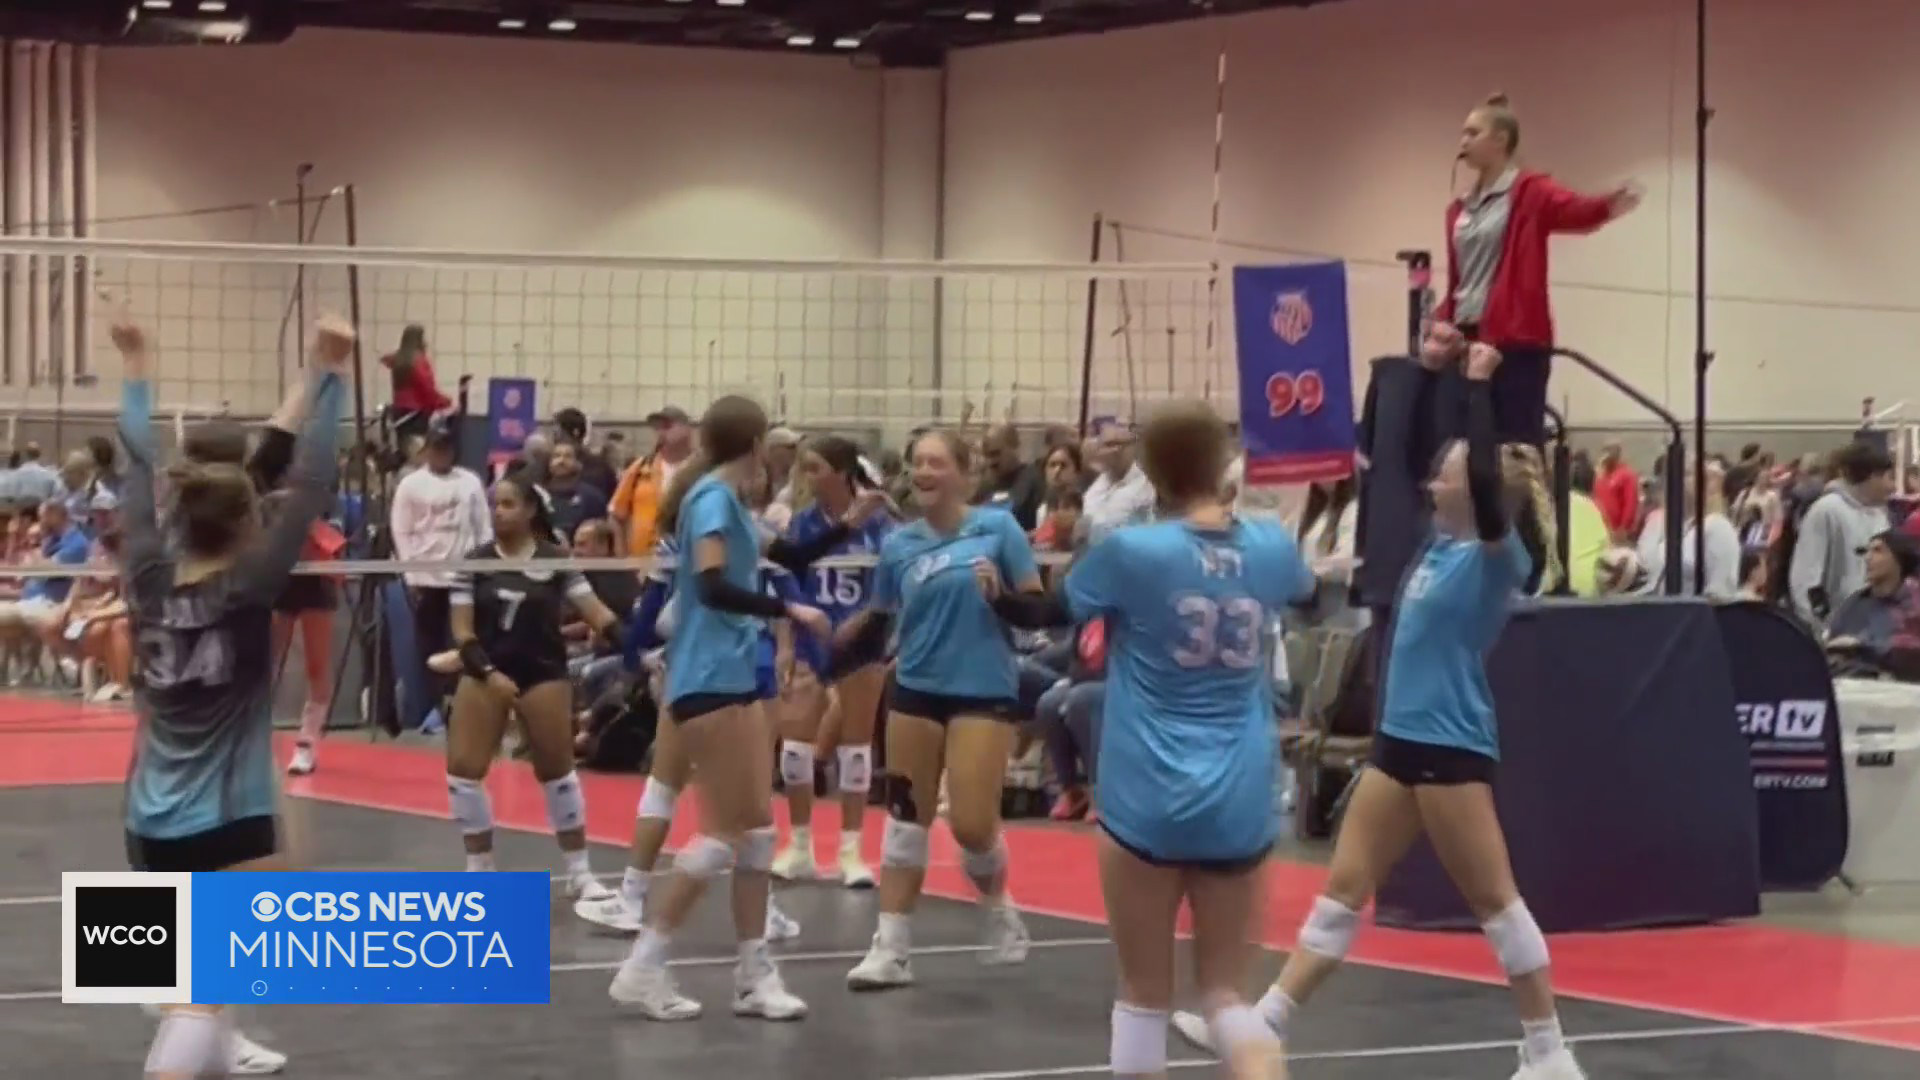 Minnesota volleyball players compete at AAU nationals in Orlando